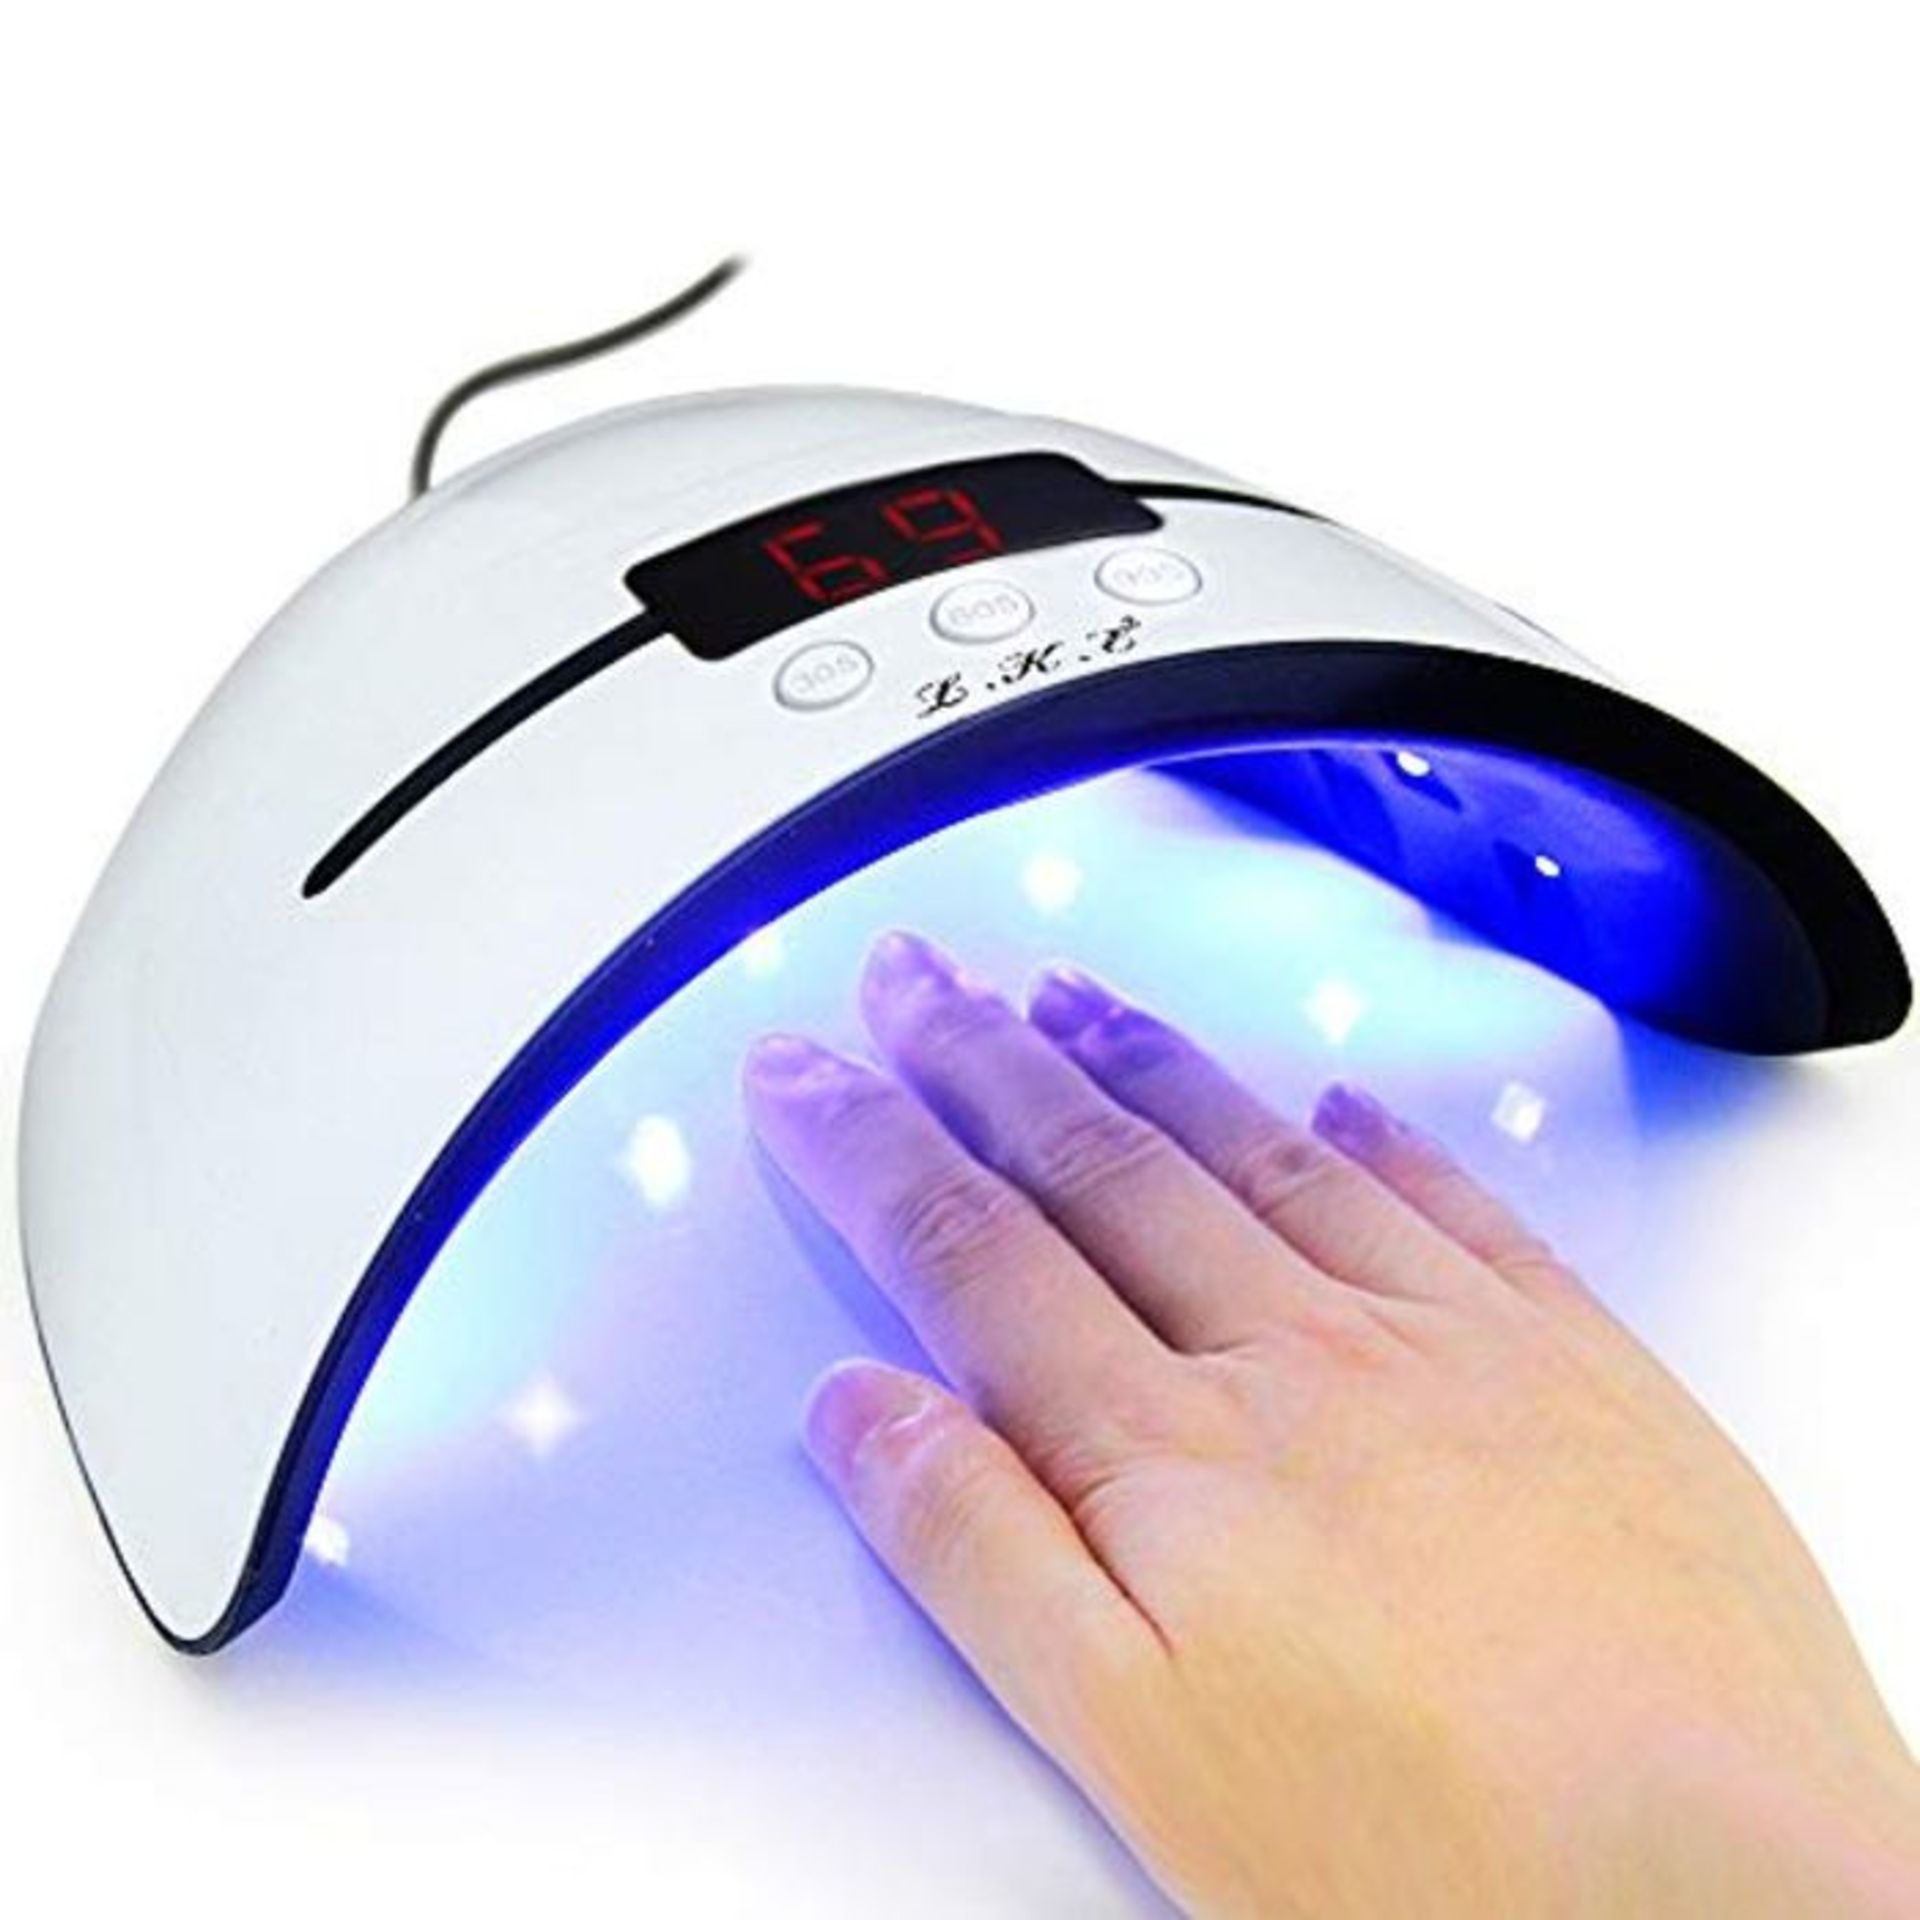 LED UV Nail Lamps for Gel Nail Polish Nail Dryer Curing Lamp with 3 Timers Auto Sensor